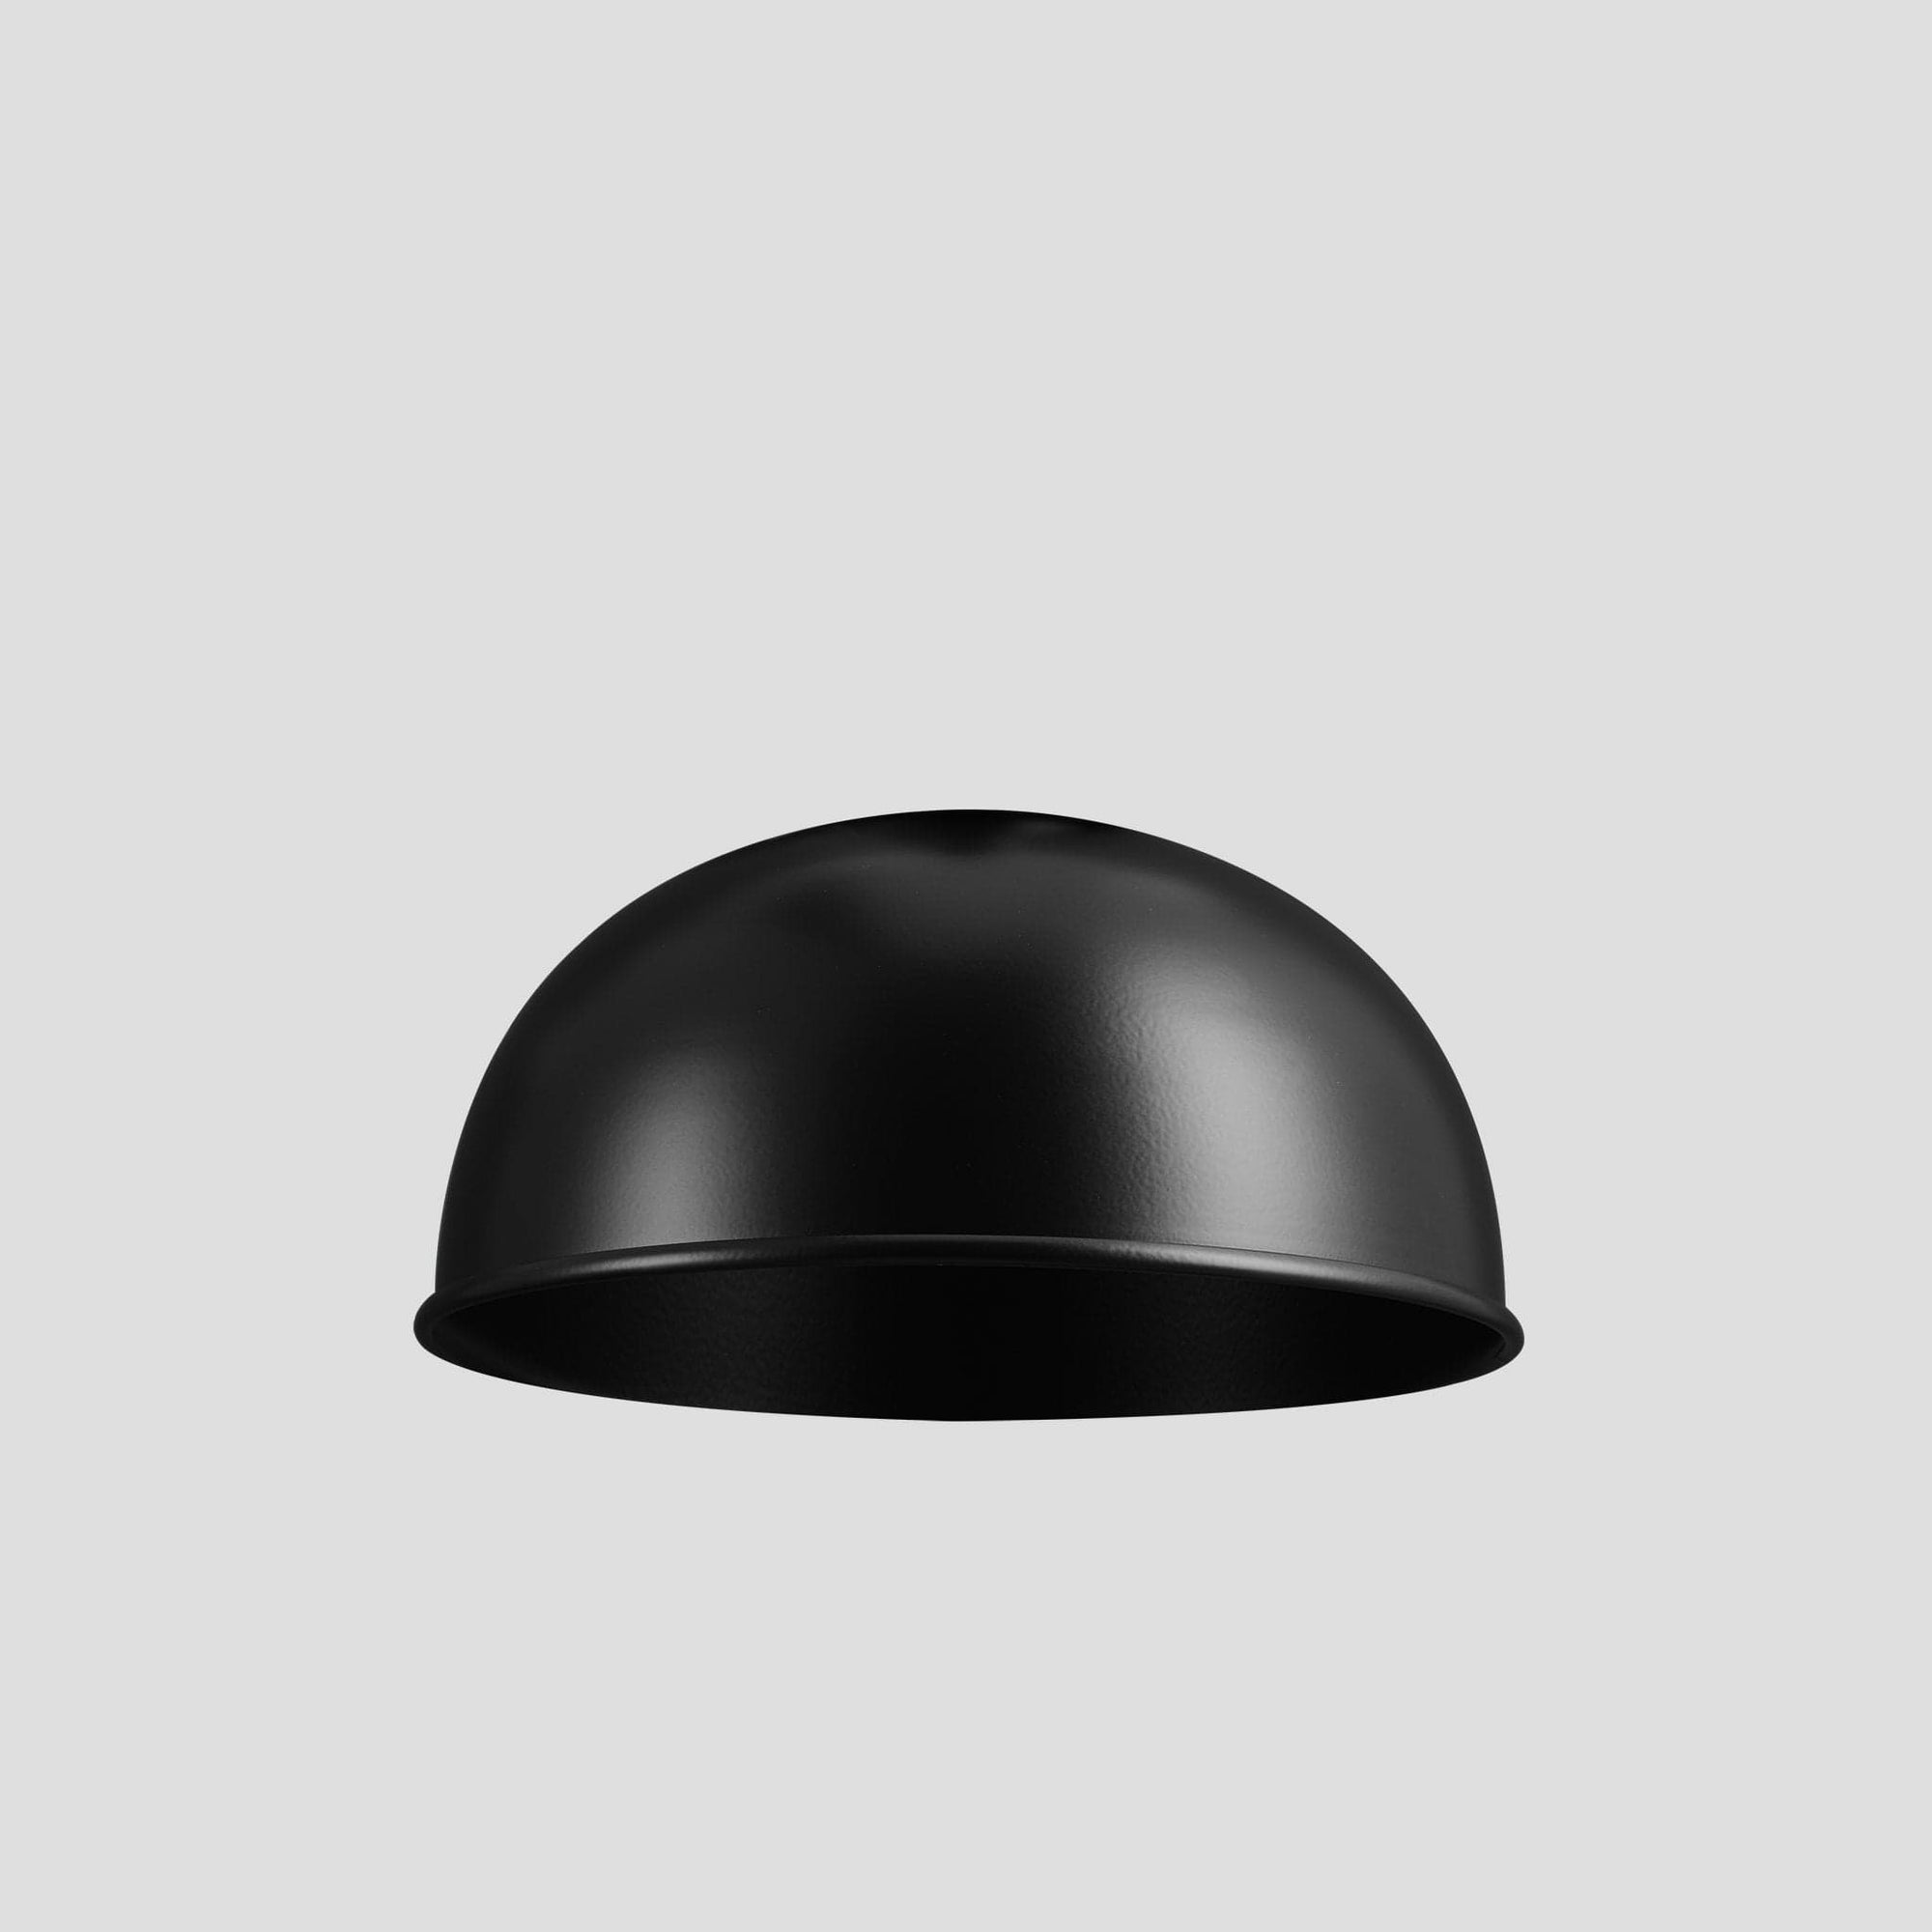 Dome - 8 Inch - Black - Shade Only Industville D8-BK-SO